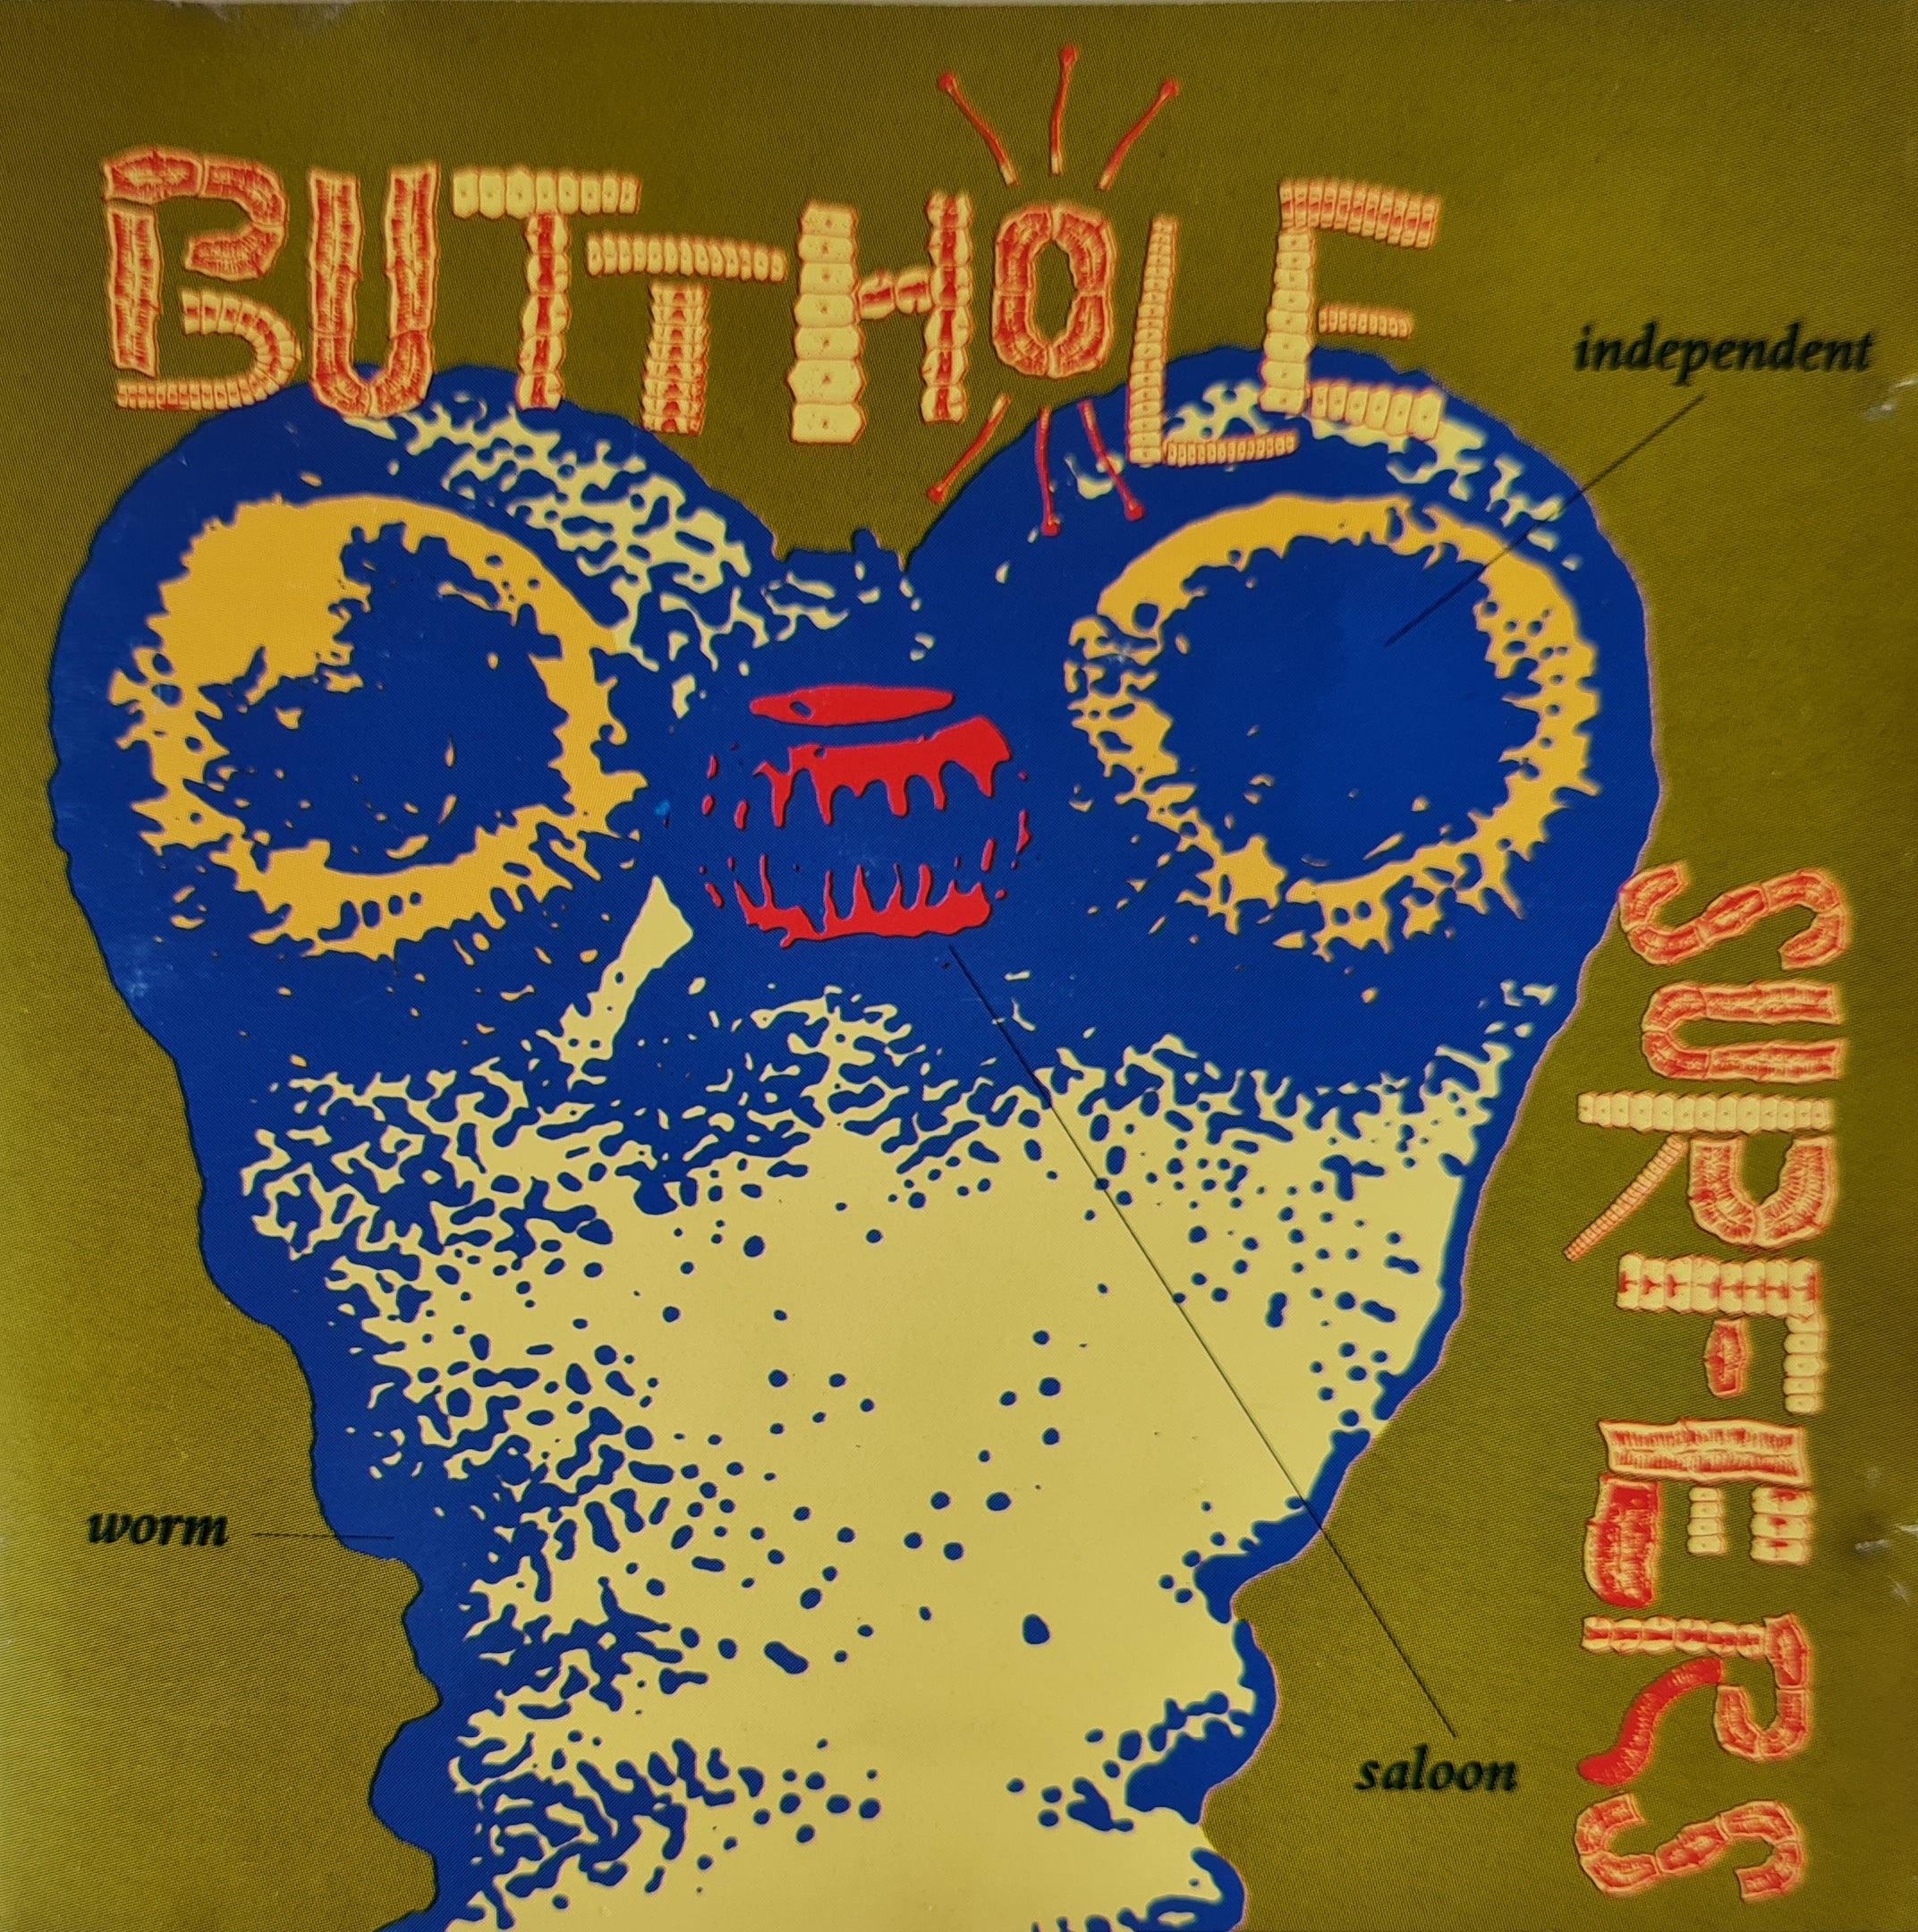 Butthole Surfers - Independent Worm Saloon (CD)